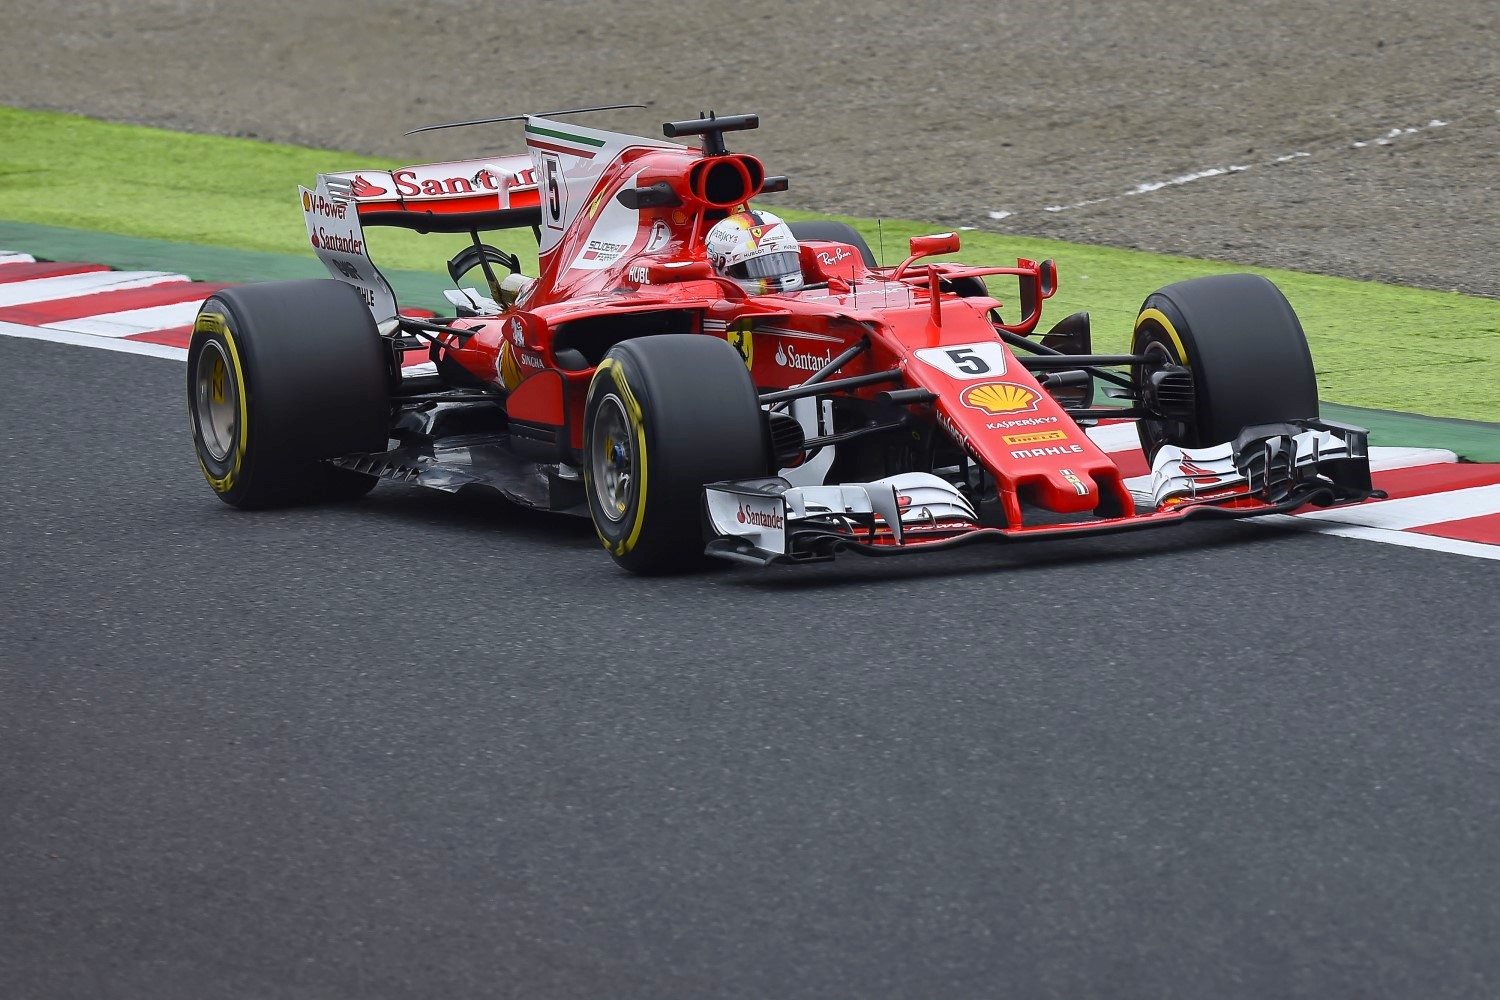 Vettel will start 2nd, but his Ferrari is no match for the Mercedes